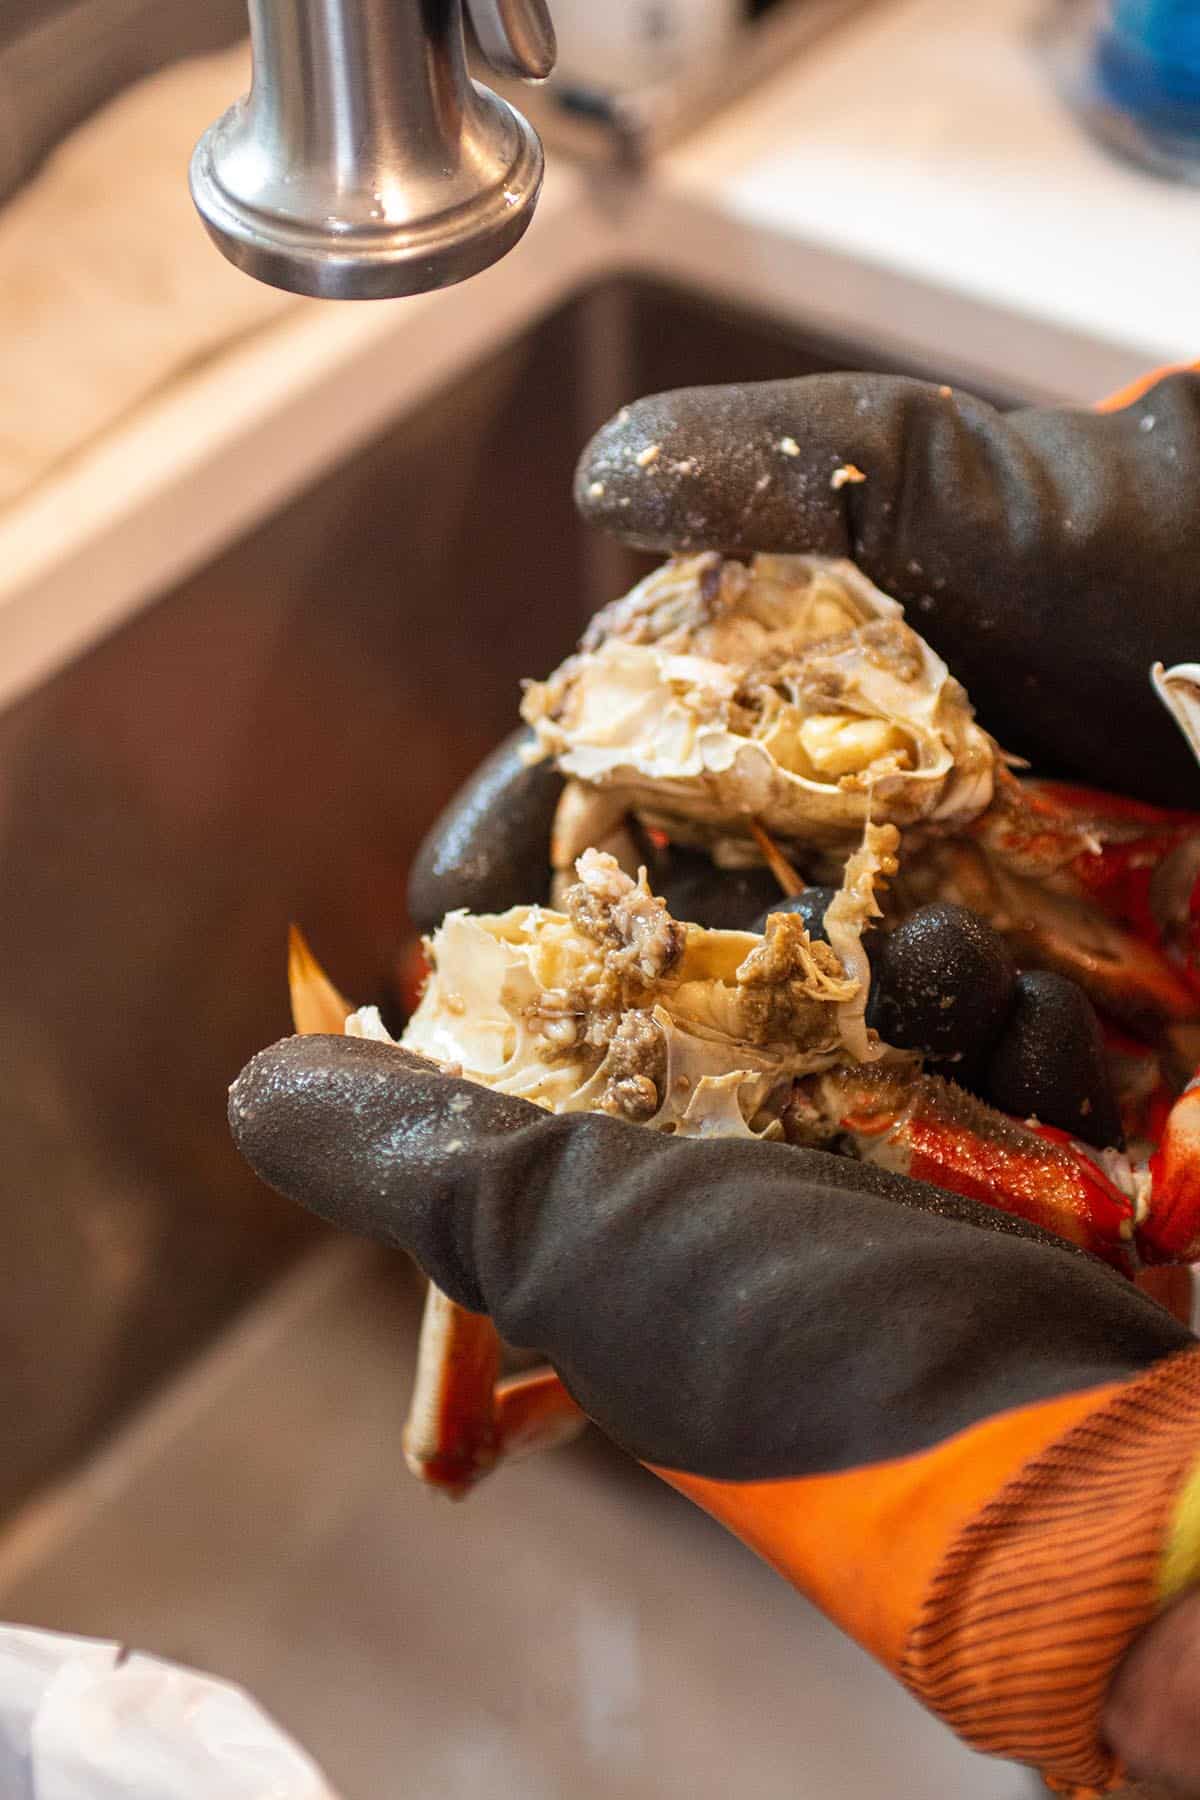 A crab being cracked in half.